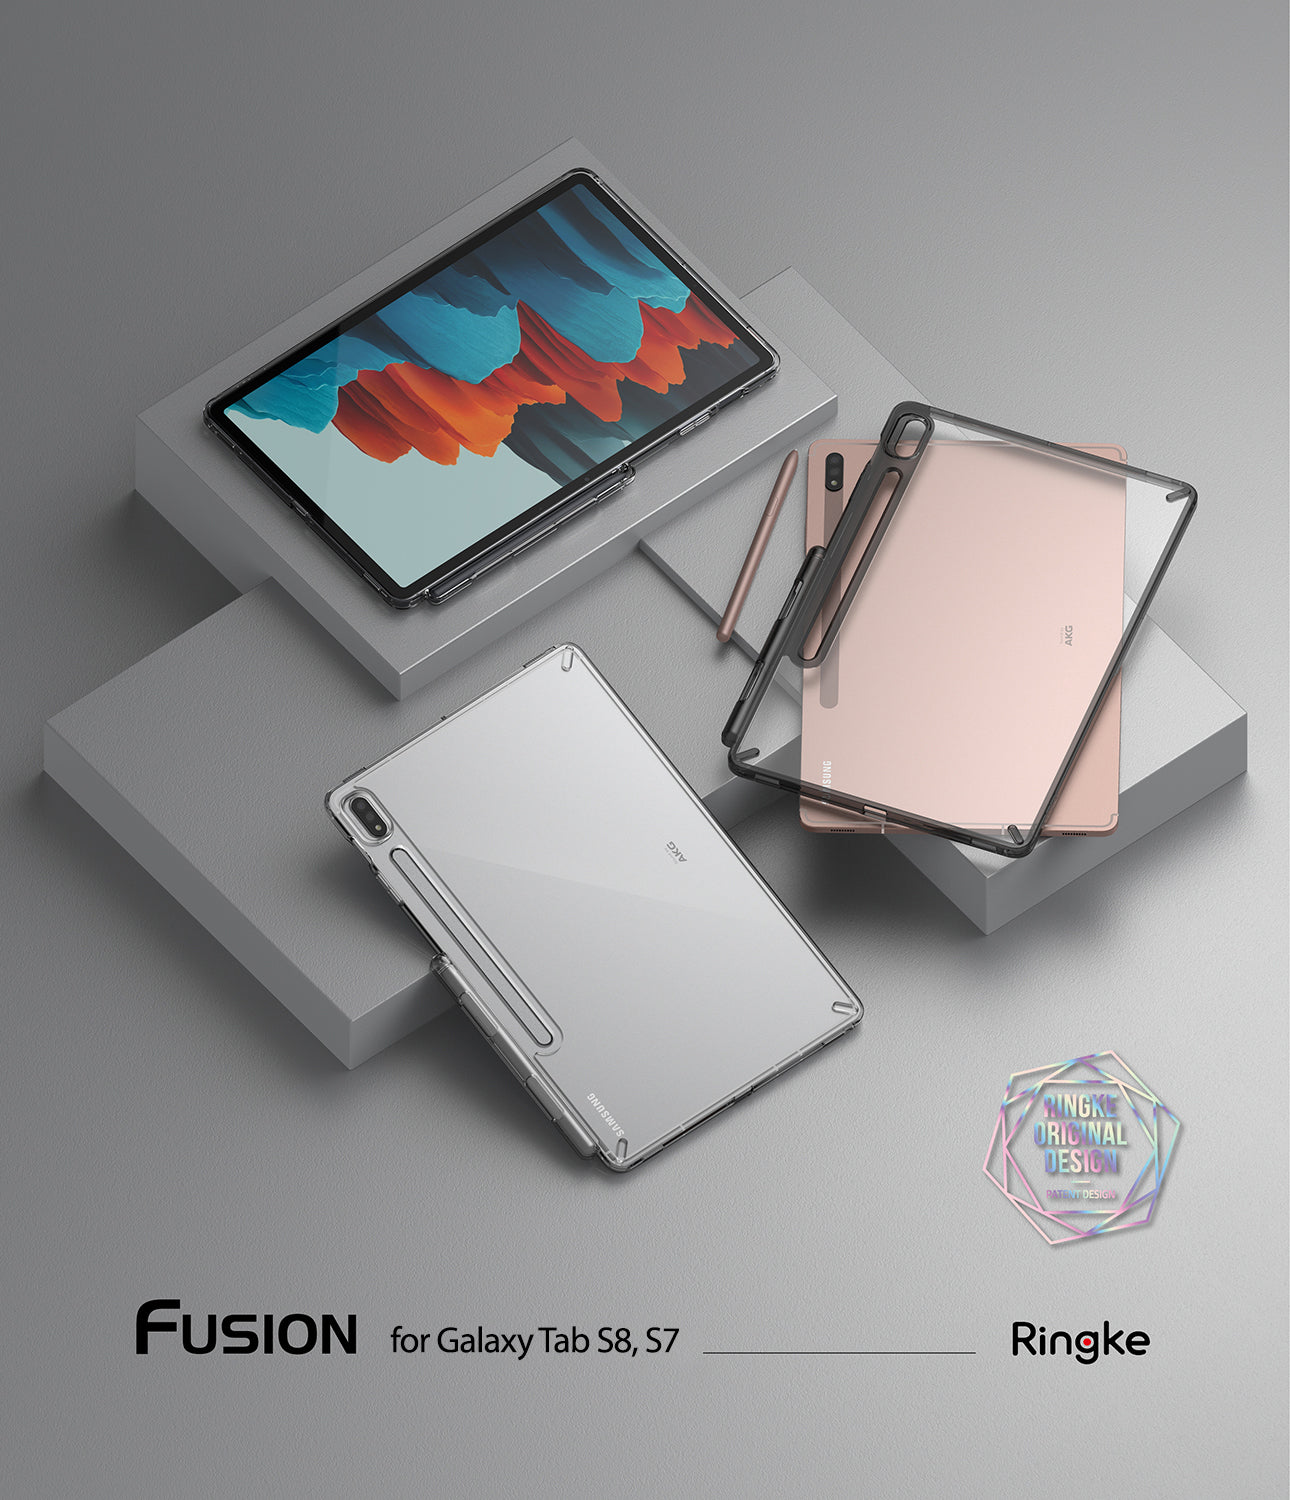 Galaxy Tab S8 / Tab S7 Case | Fusion - Ringke Official Store